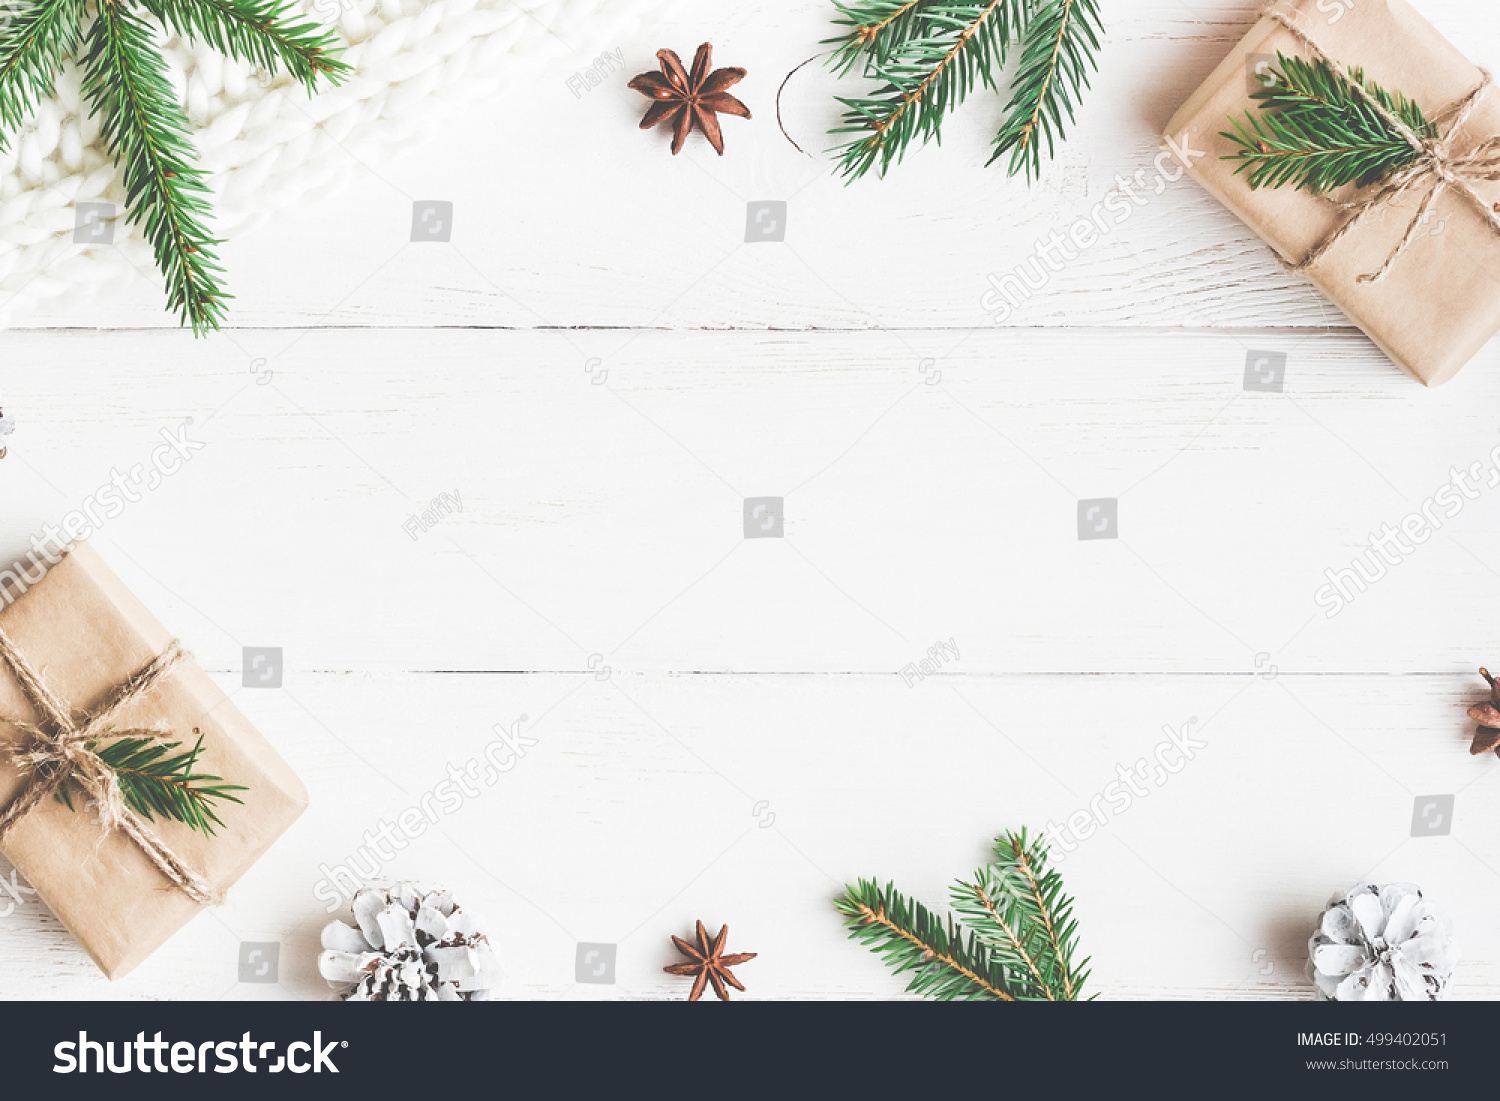 Christmas composition. Christmas gift, knitted blanket, pine cones, fir branches on wooden white background. Flat lay, top view, copy space #499402051